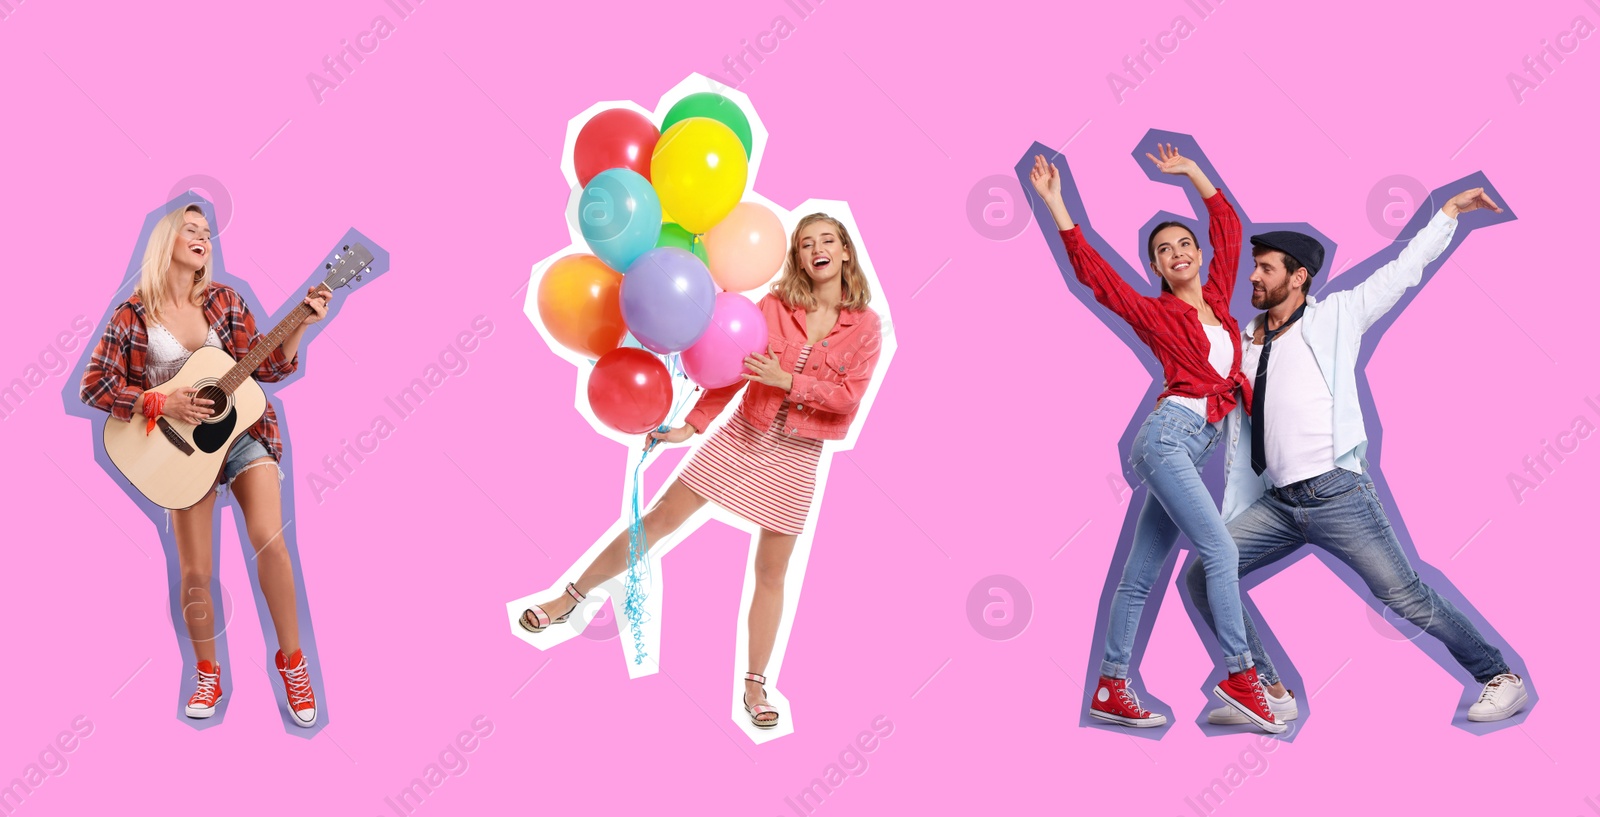 Image of Pop art poster. Happy women and man on pink background. Banner design